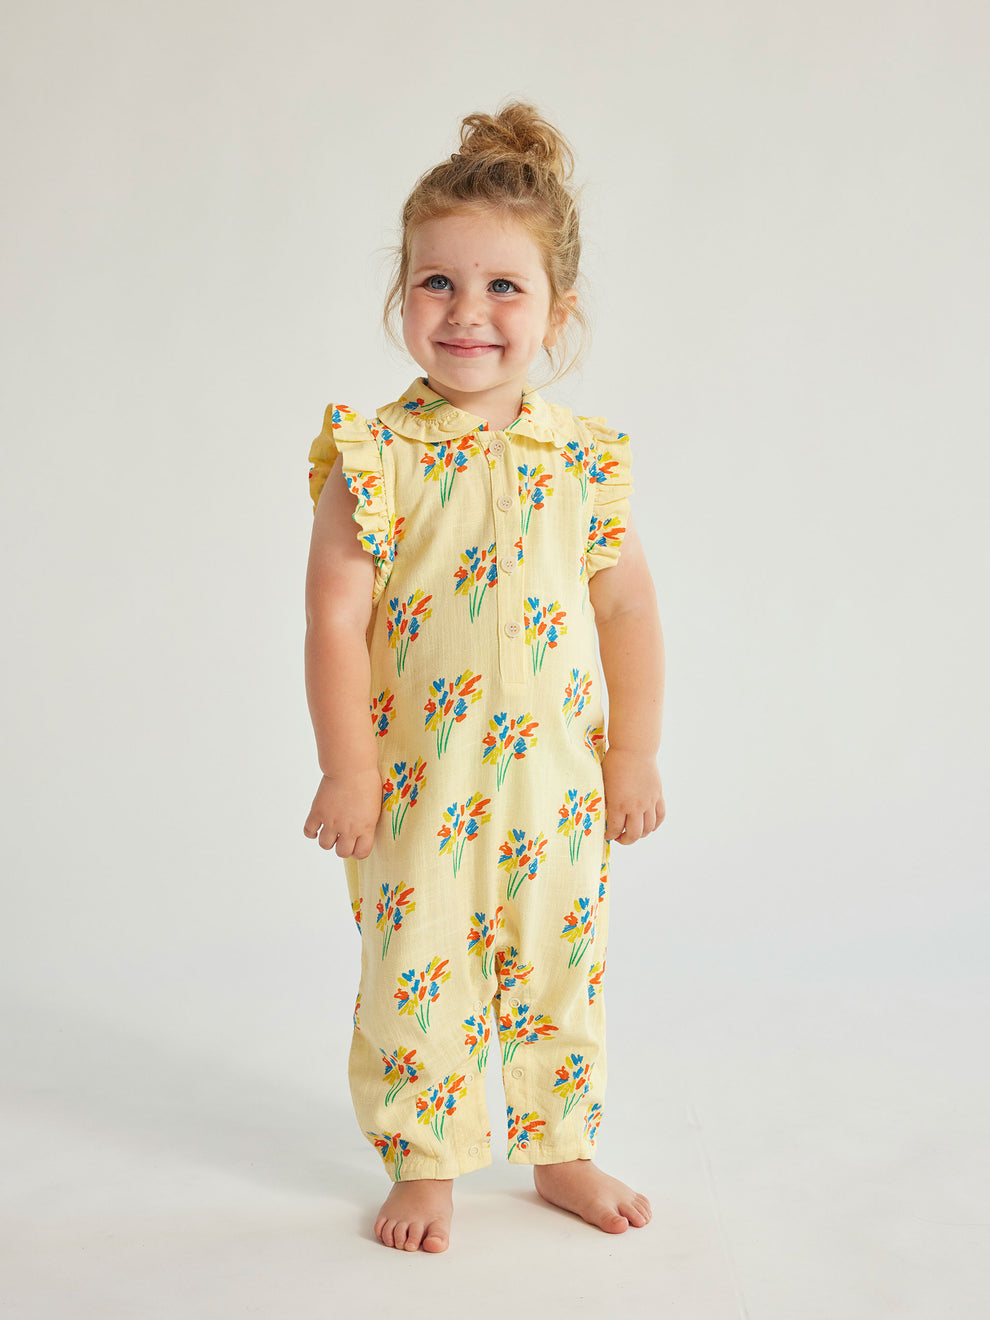 Bobo Choses Baby Fireworks all over woven overall